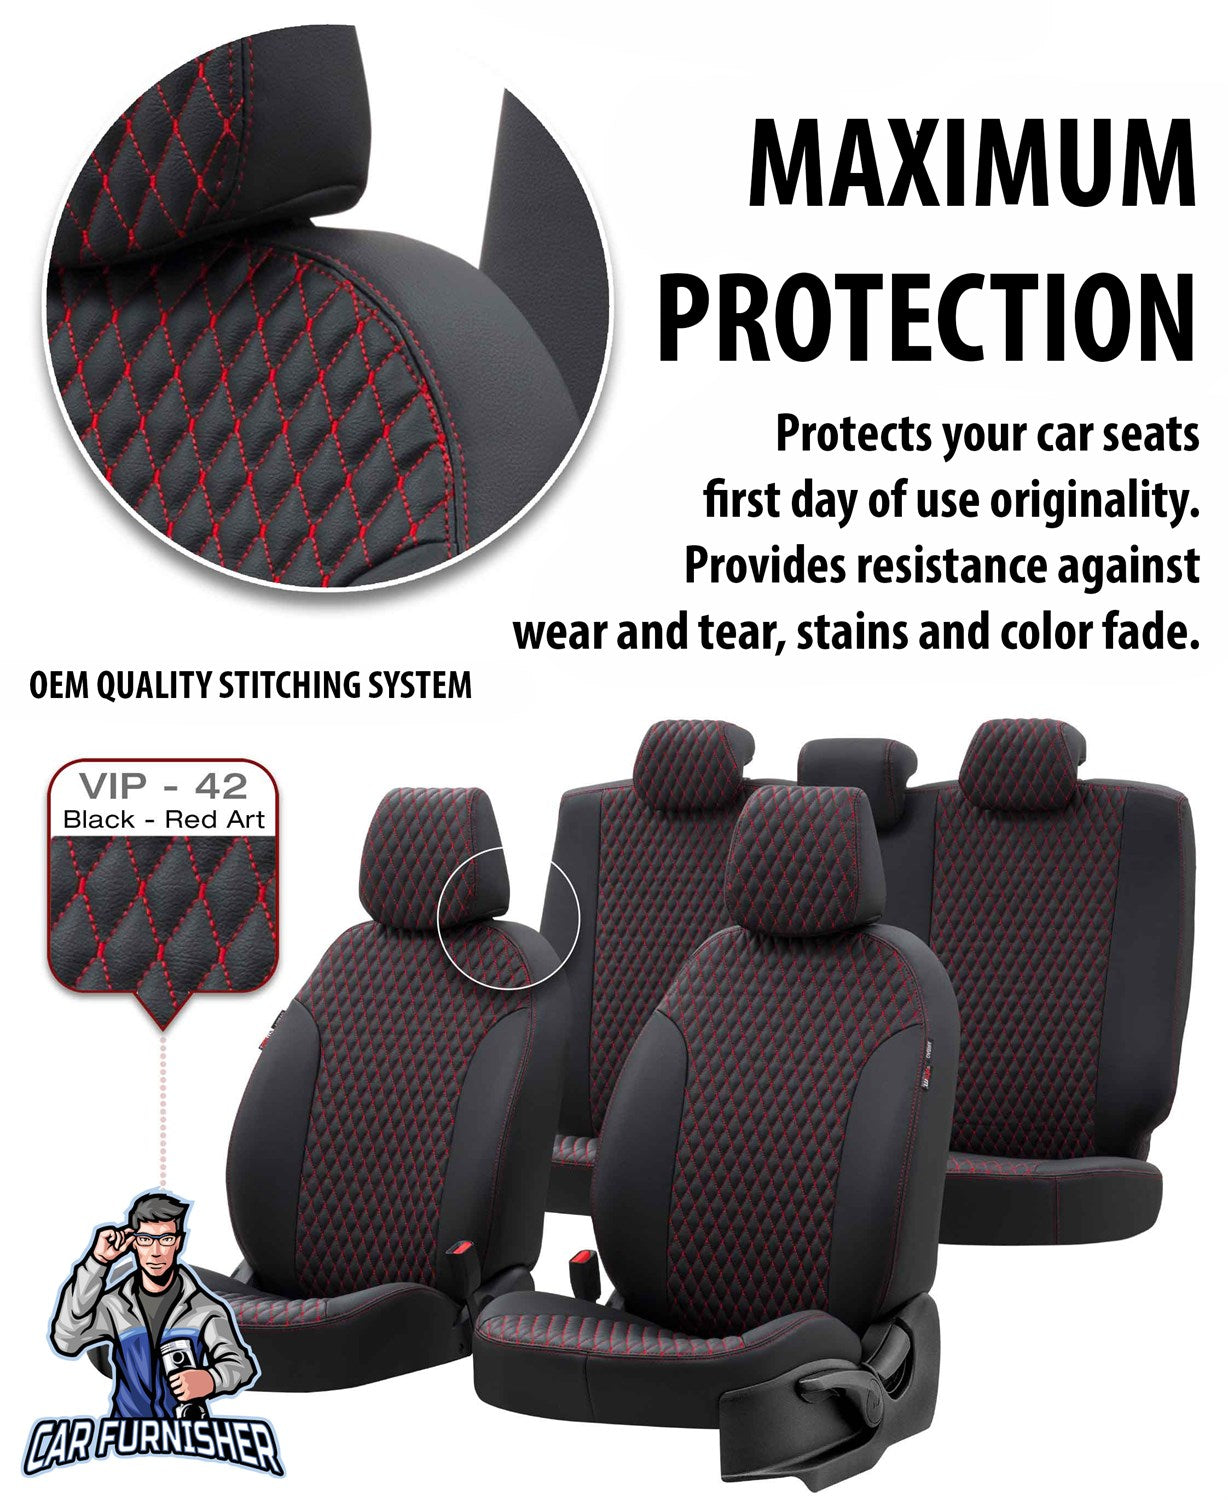 Nissan Qashqai Seat Covers Amsterdam Leather Design Smoked Black Leather